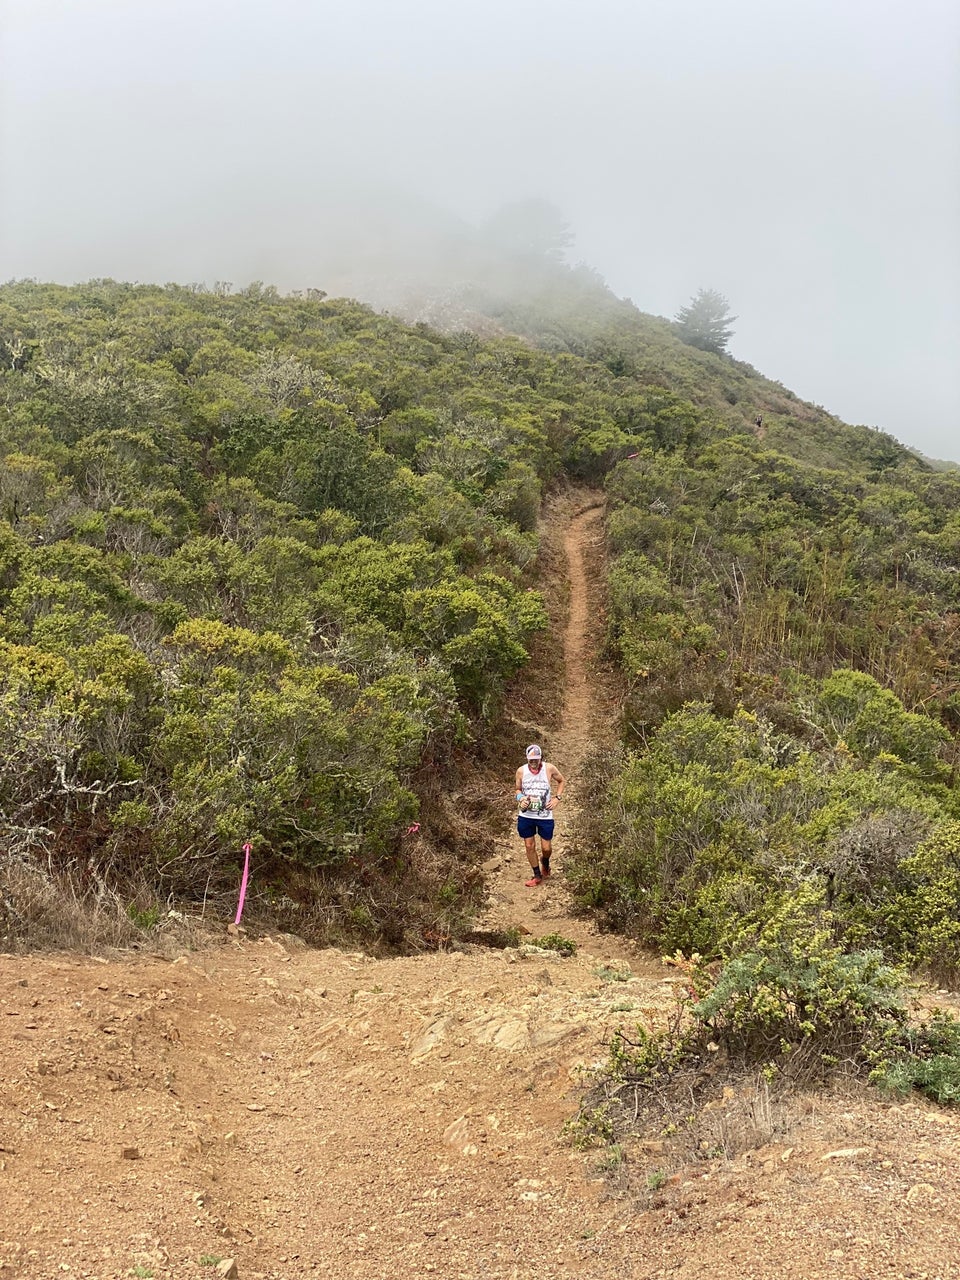 Fogged-in view of a lush green hillside, narrow singletrack trail cutting up from the right and approaching the center, with Tantek power hiking uphill, grinning, water bottle in right hand, holding his side with his left.